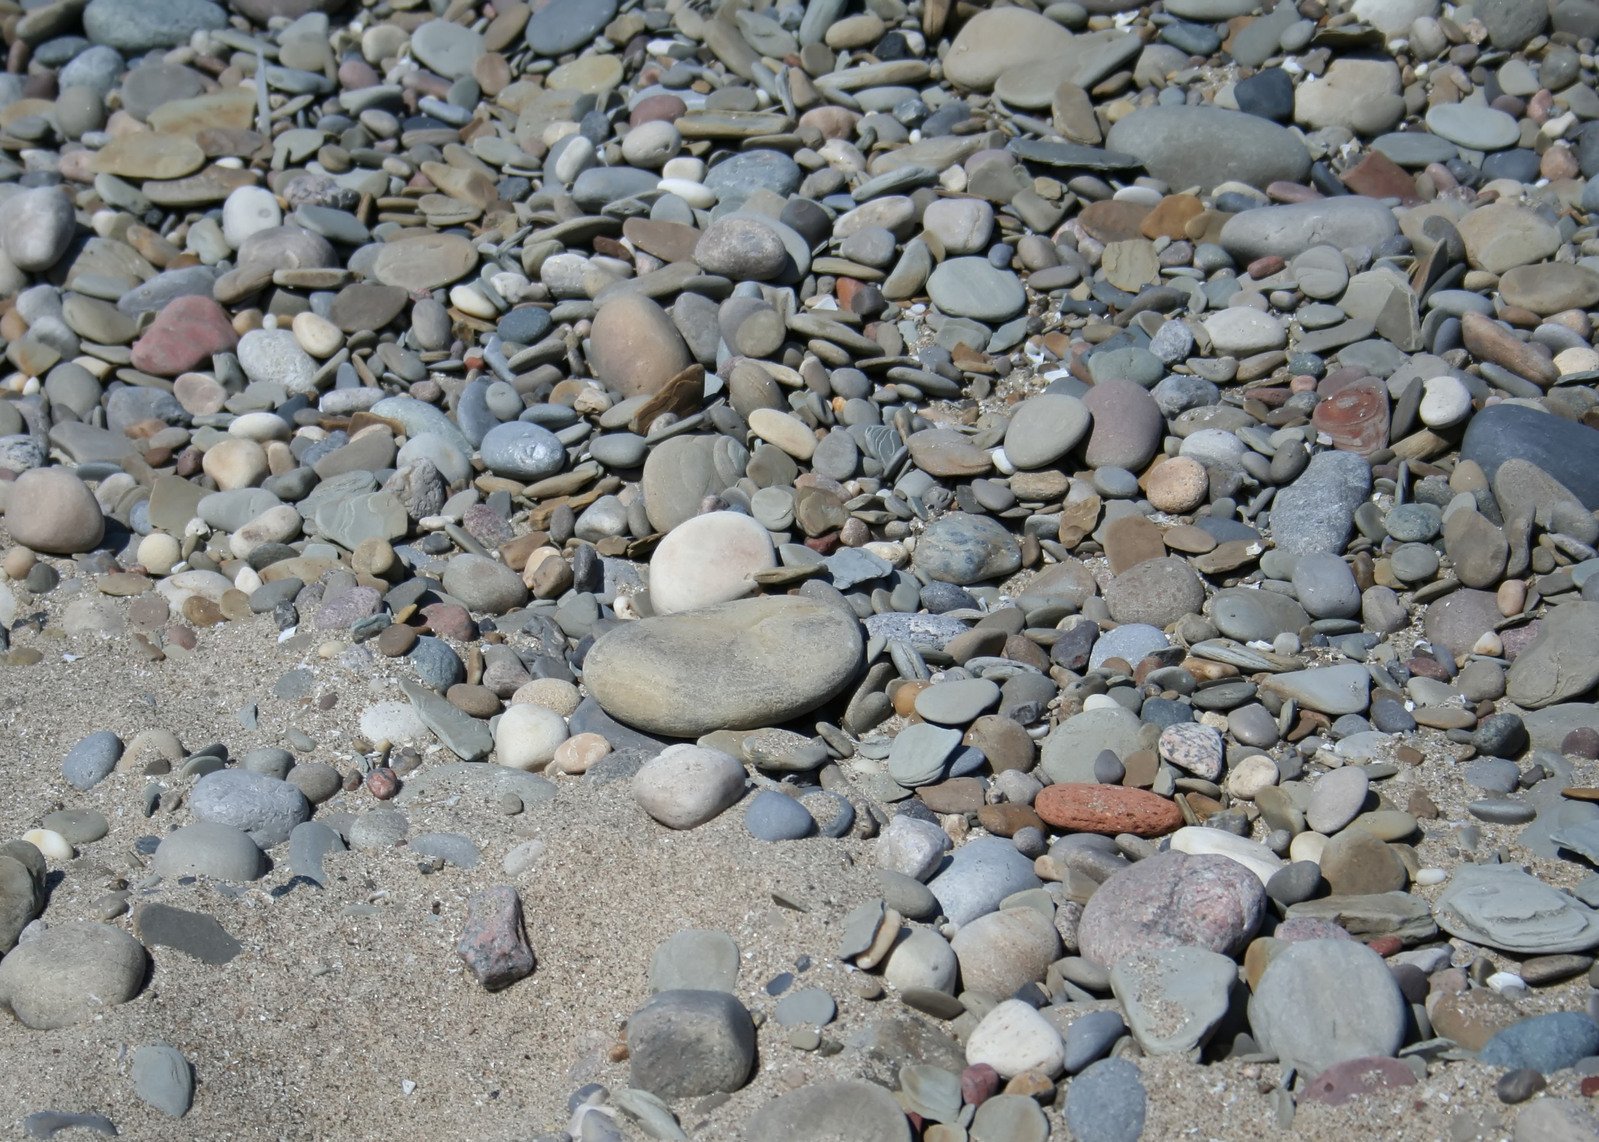 several pebbles are on the ground near a brown bird